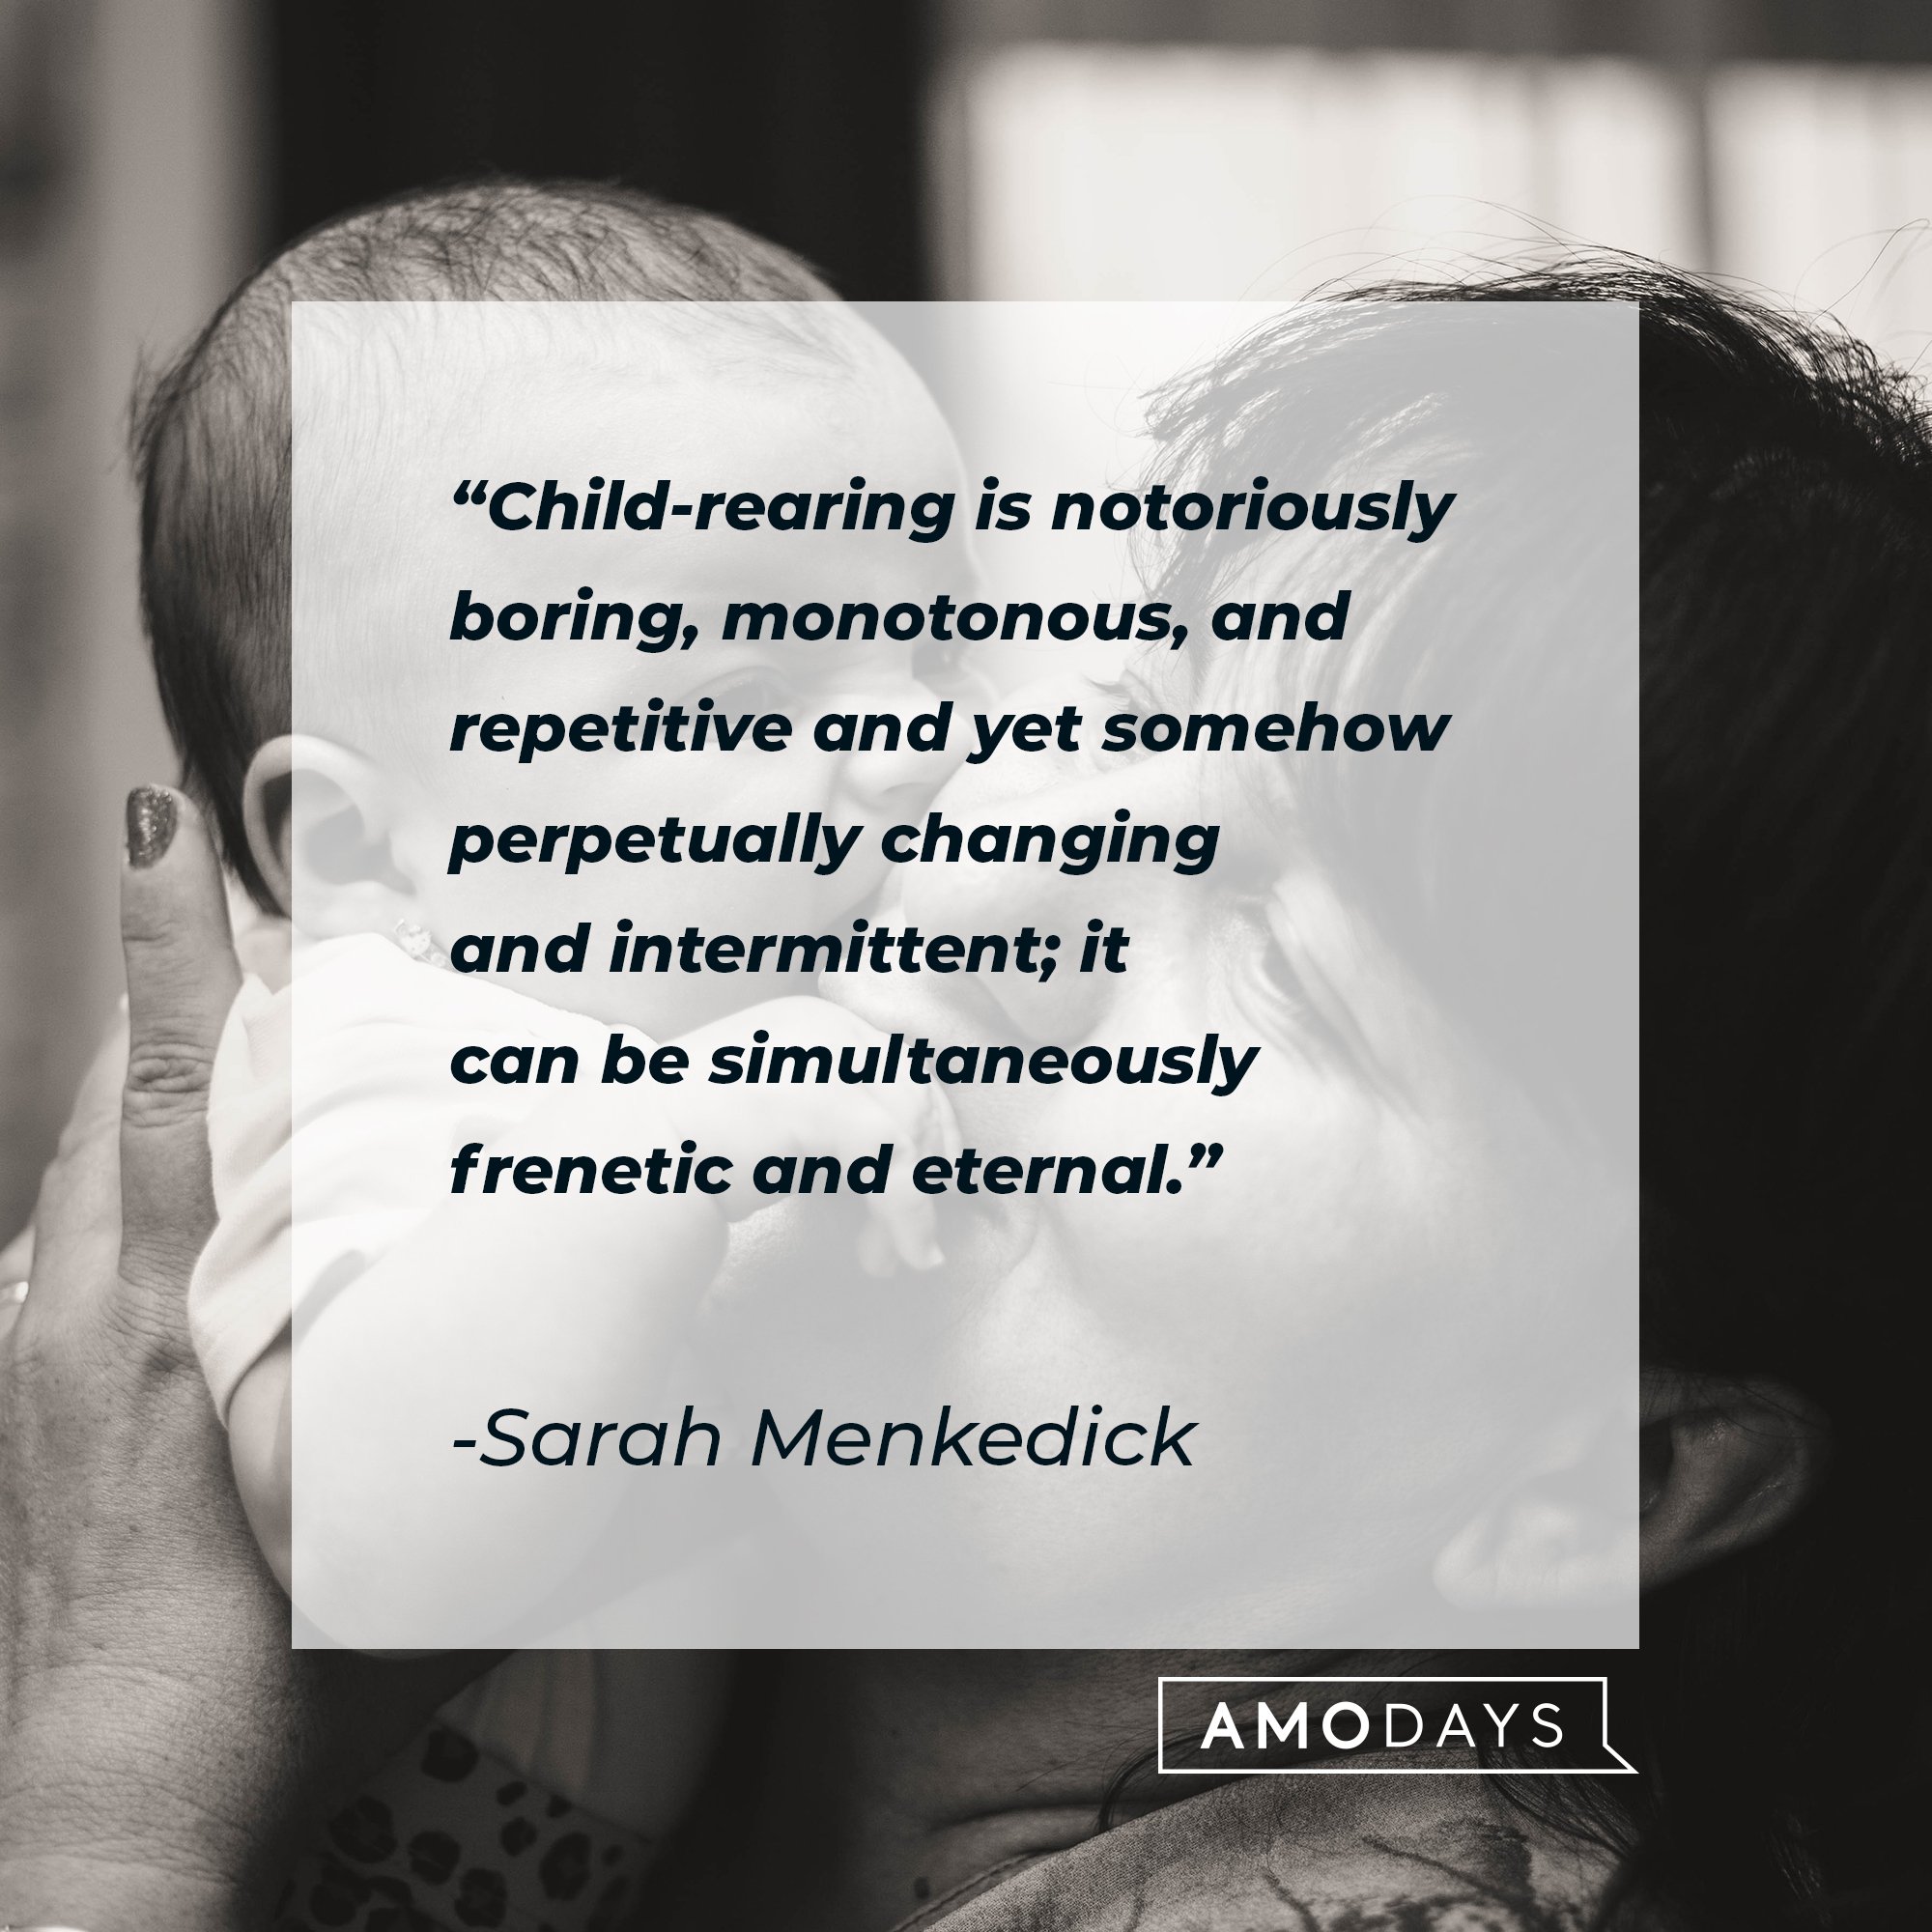 Sarah Menkedick's quote: "Child-rearing is notoriously boring, monotonous, and repetitive and yet somehow perpetually changing and intermittent; it can be simultaneously frenetic and eternal." | Image: AmoDays